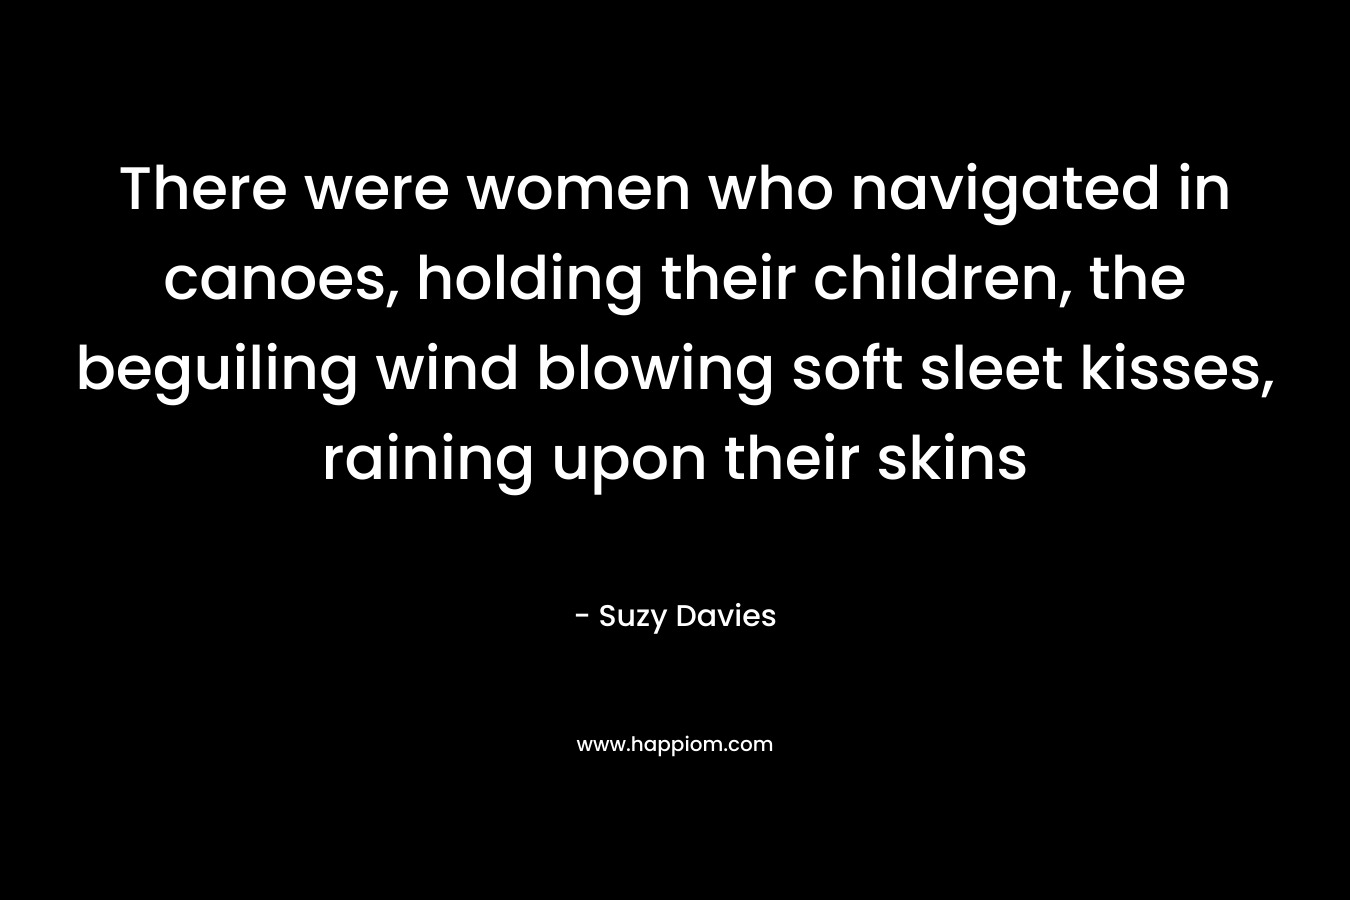 There were women who navigated in canoes, holding their children, the beguiling wind blowing soft sleet kisses, raining upon their skins – Suzy  Davies